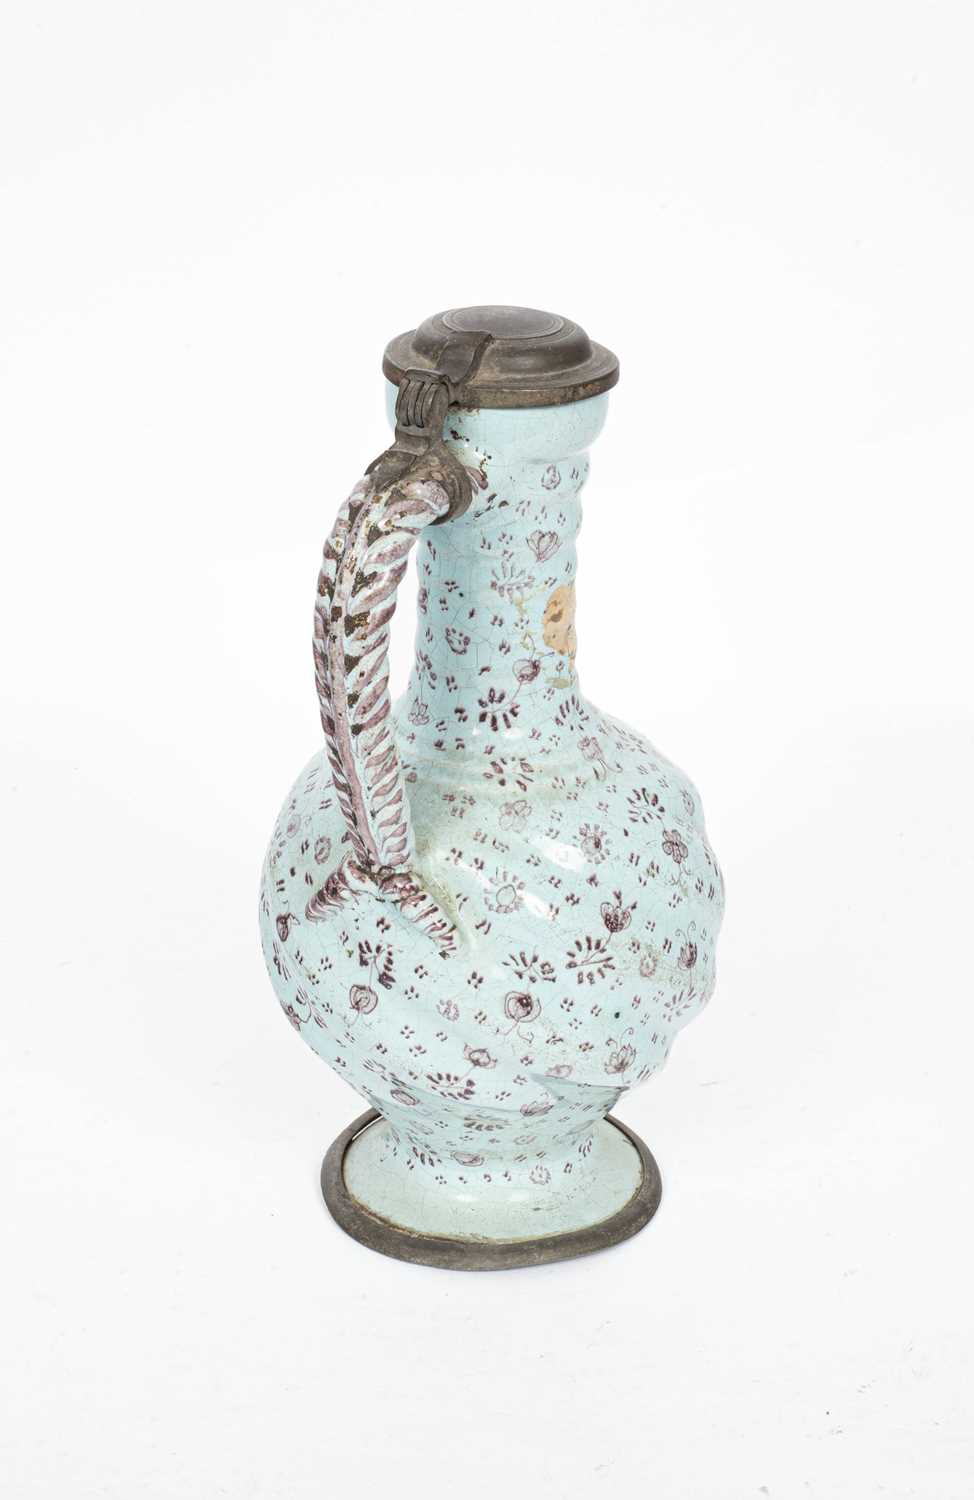 A German faience pewter-mounted jug - Image 3 of 4